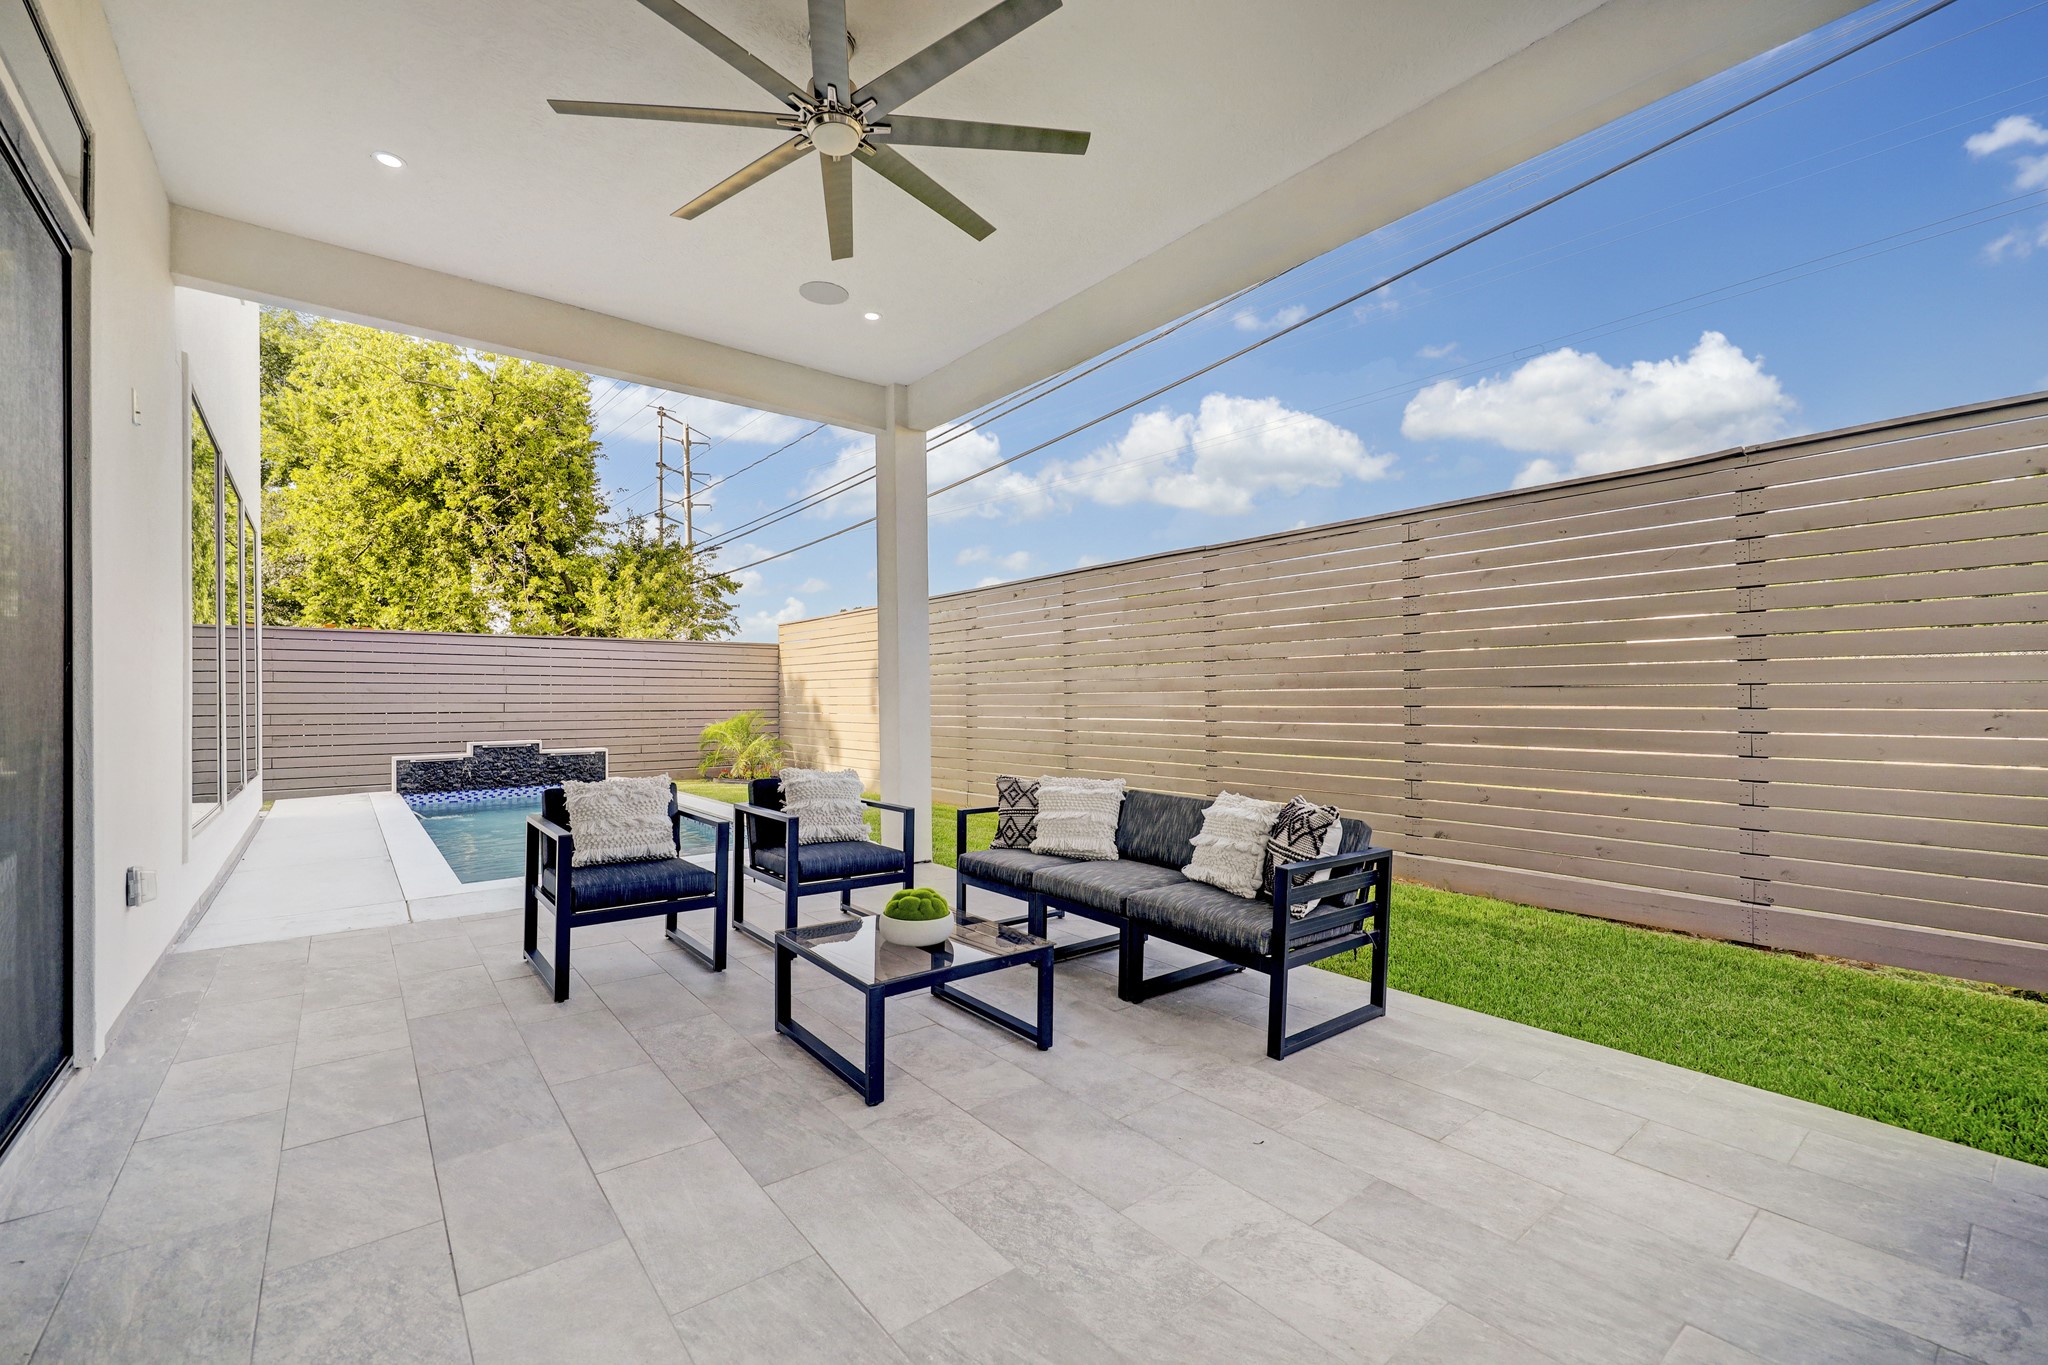 Indulge in poolside dining on the inviting covered patio, complete with a full summer kitchen.